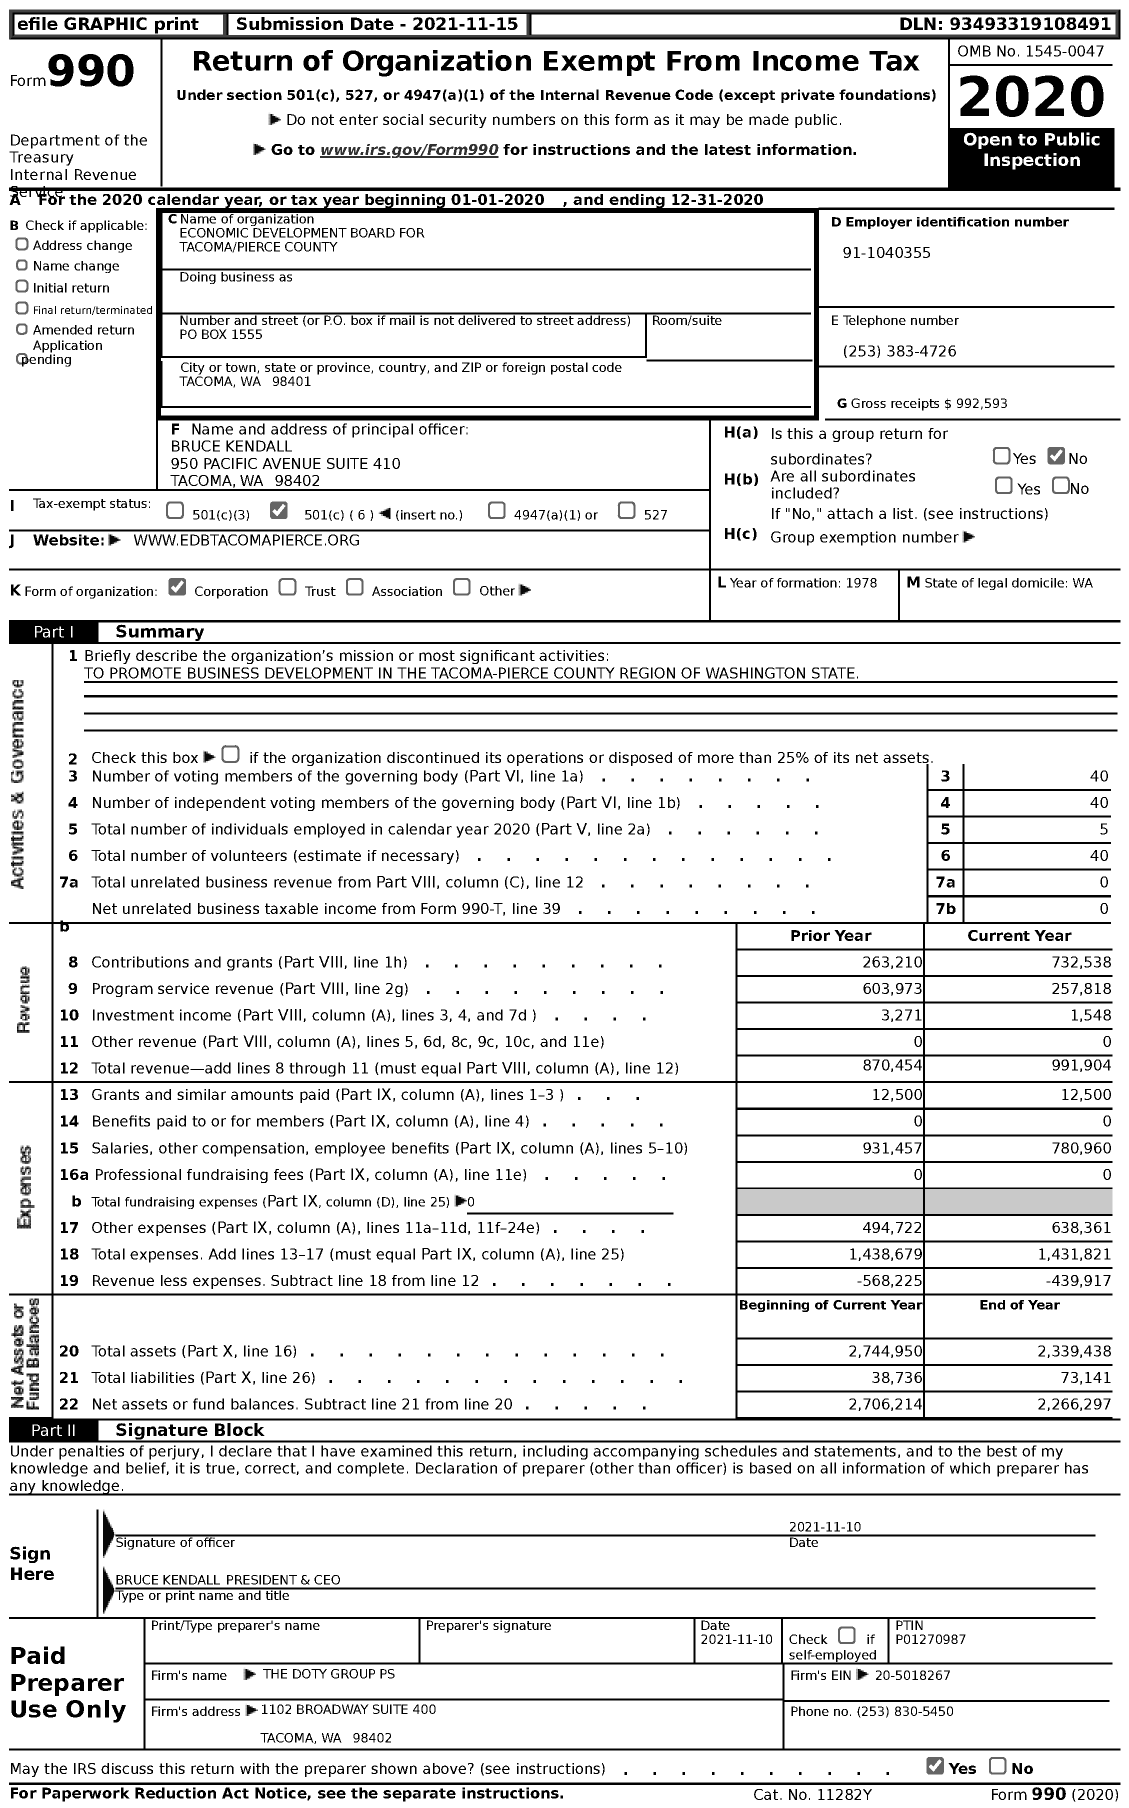 Image of first page of 2020 Form 990 for Economic Development Board for Tacoma Pierce County (EDB)